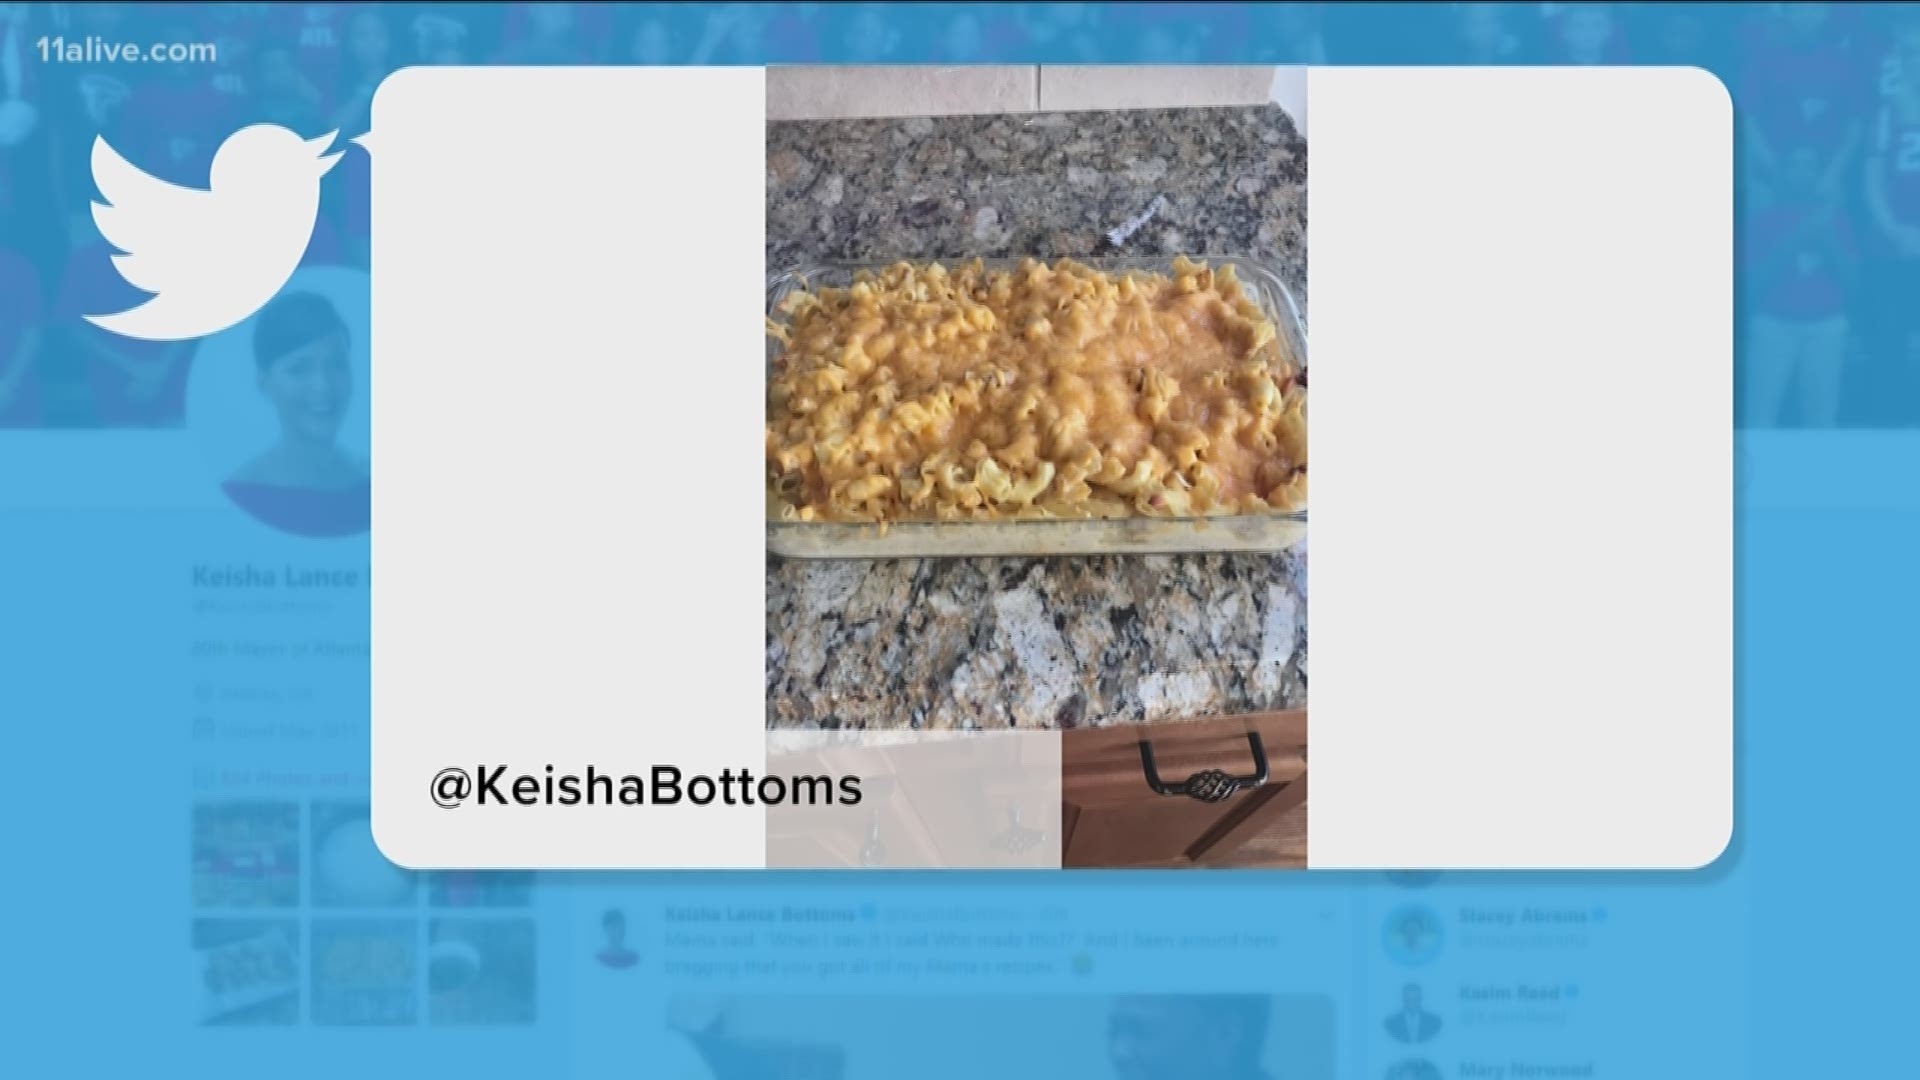 Atlanta Mayor Keisha Lance Bottoms made national headlines after tweeting photos of her mac & cheese, which some called "dry."